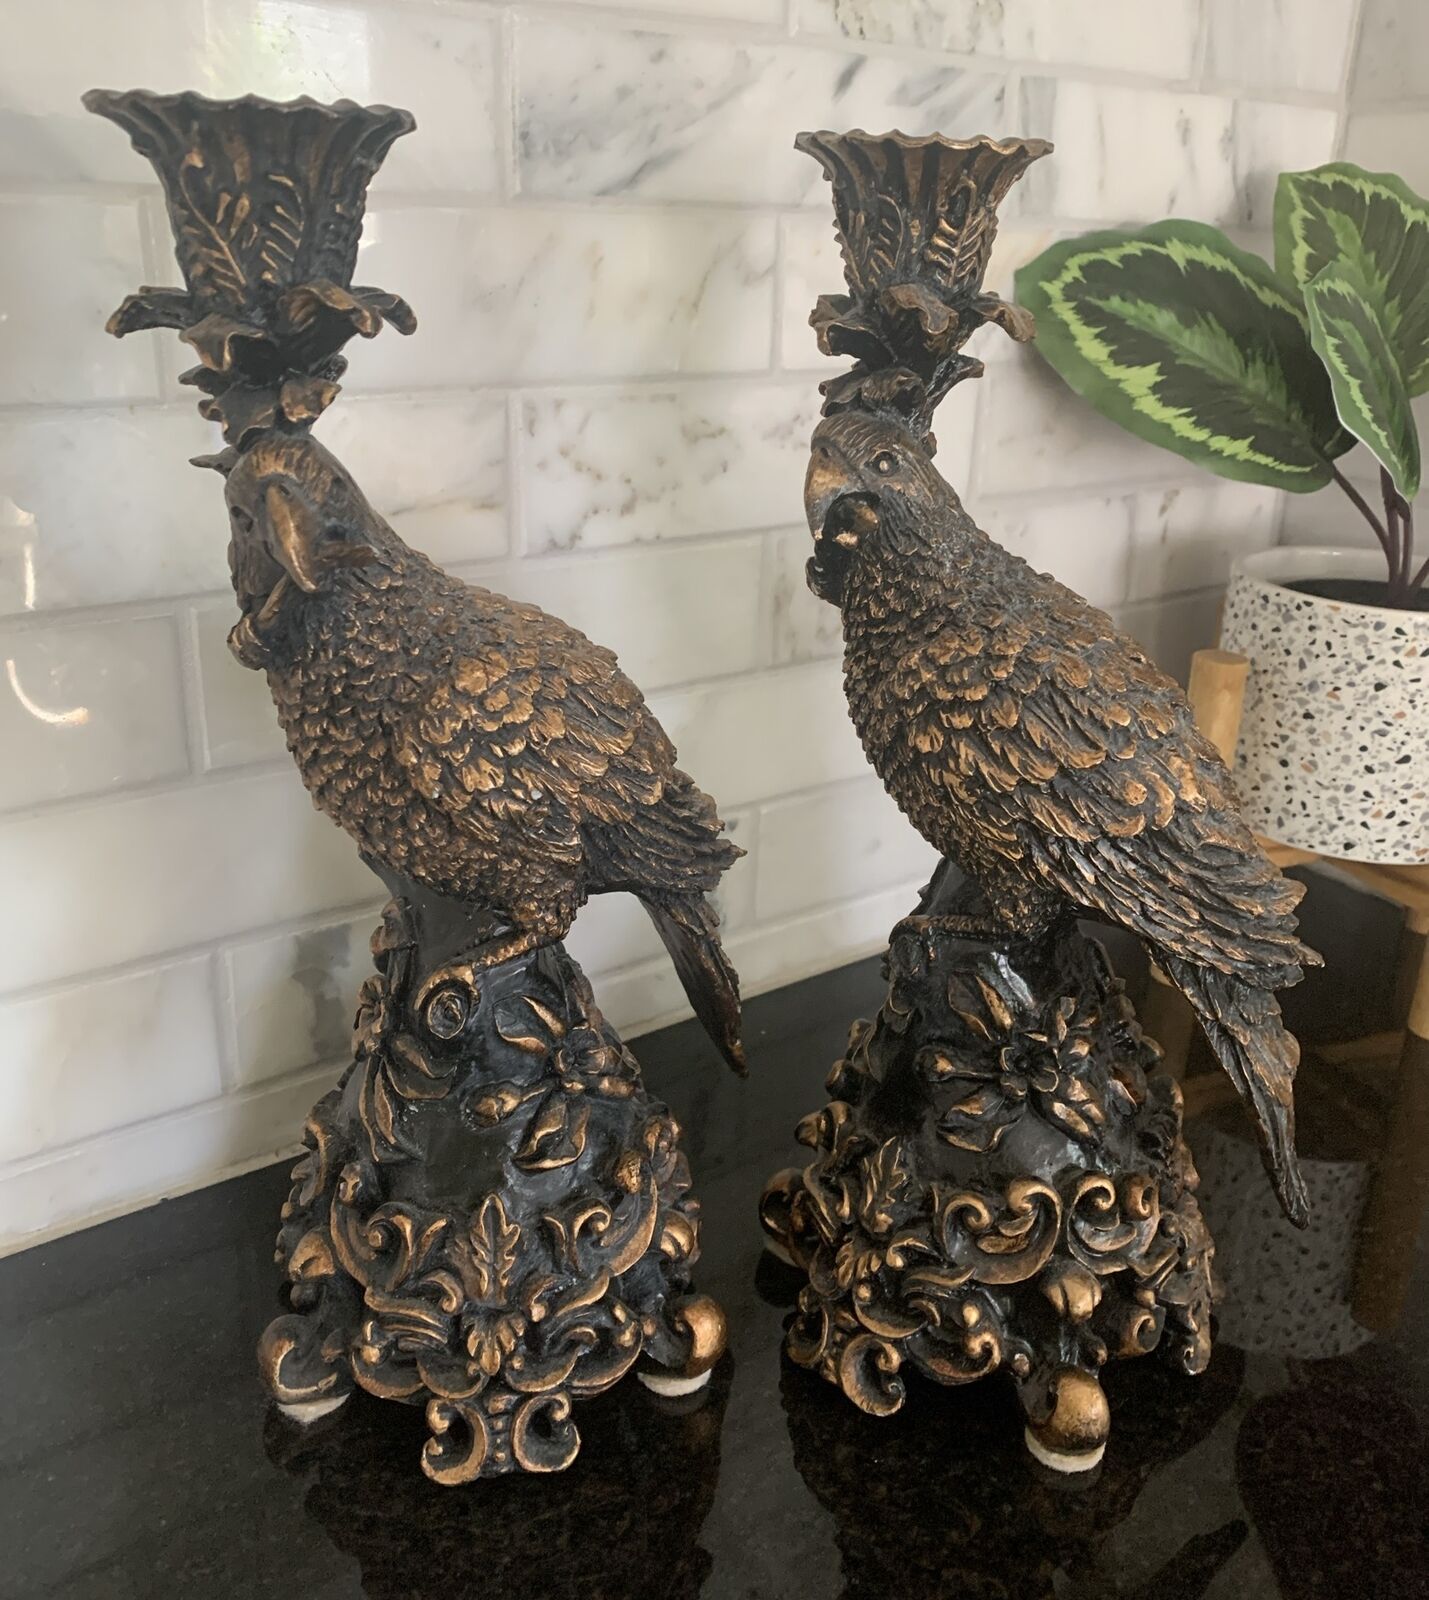 2-Vintage 1960s REPLICA  Pair of Dick Hsiao 12”  Parrot Bird Candle Holders